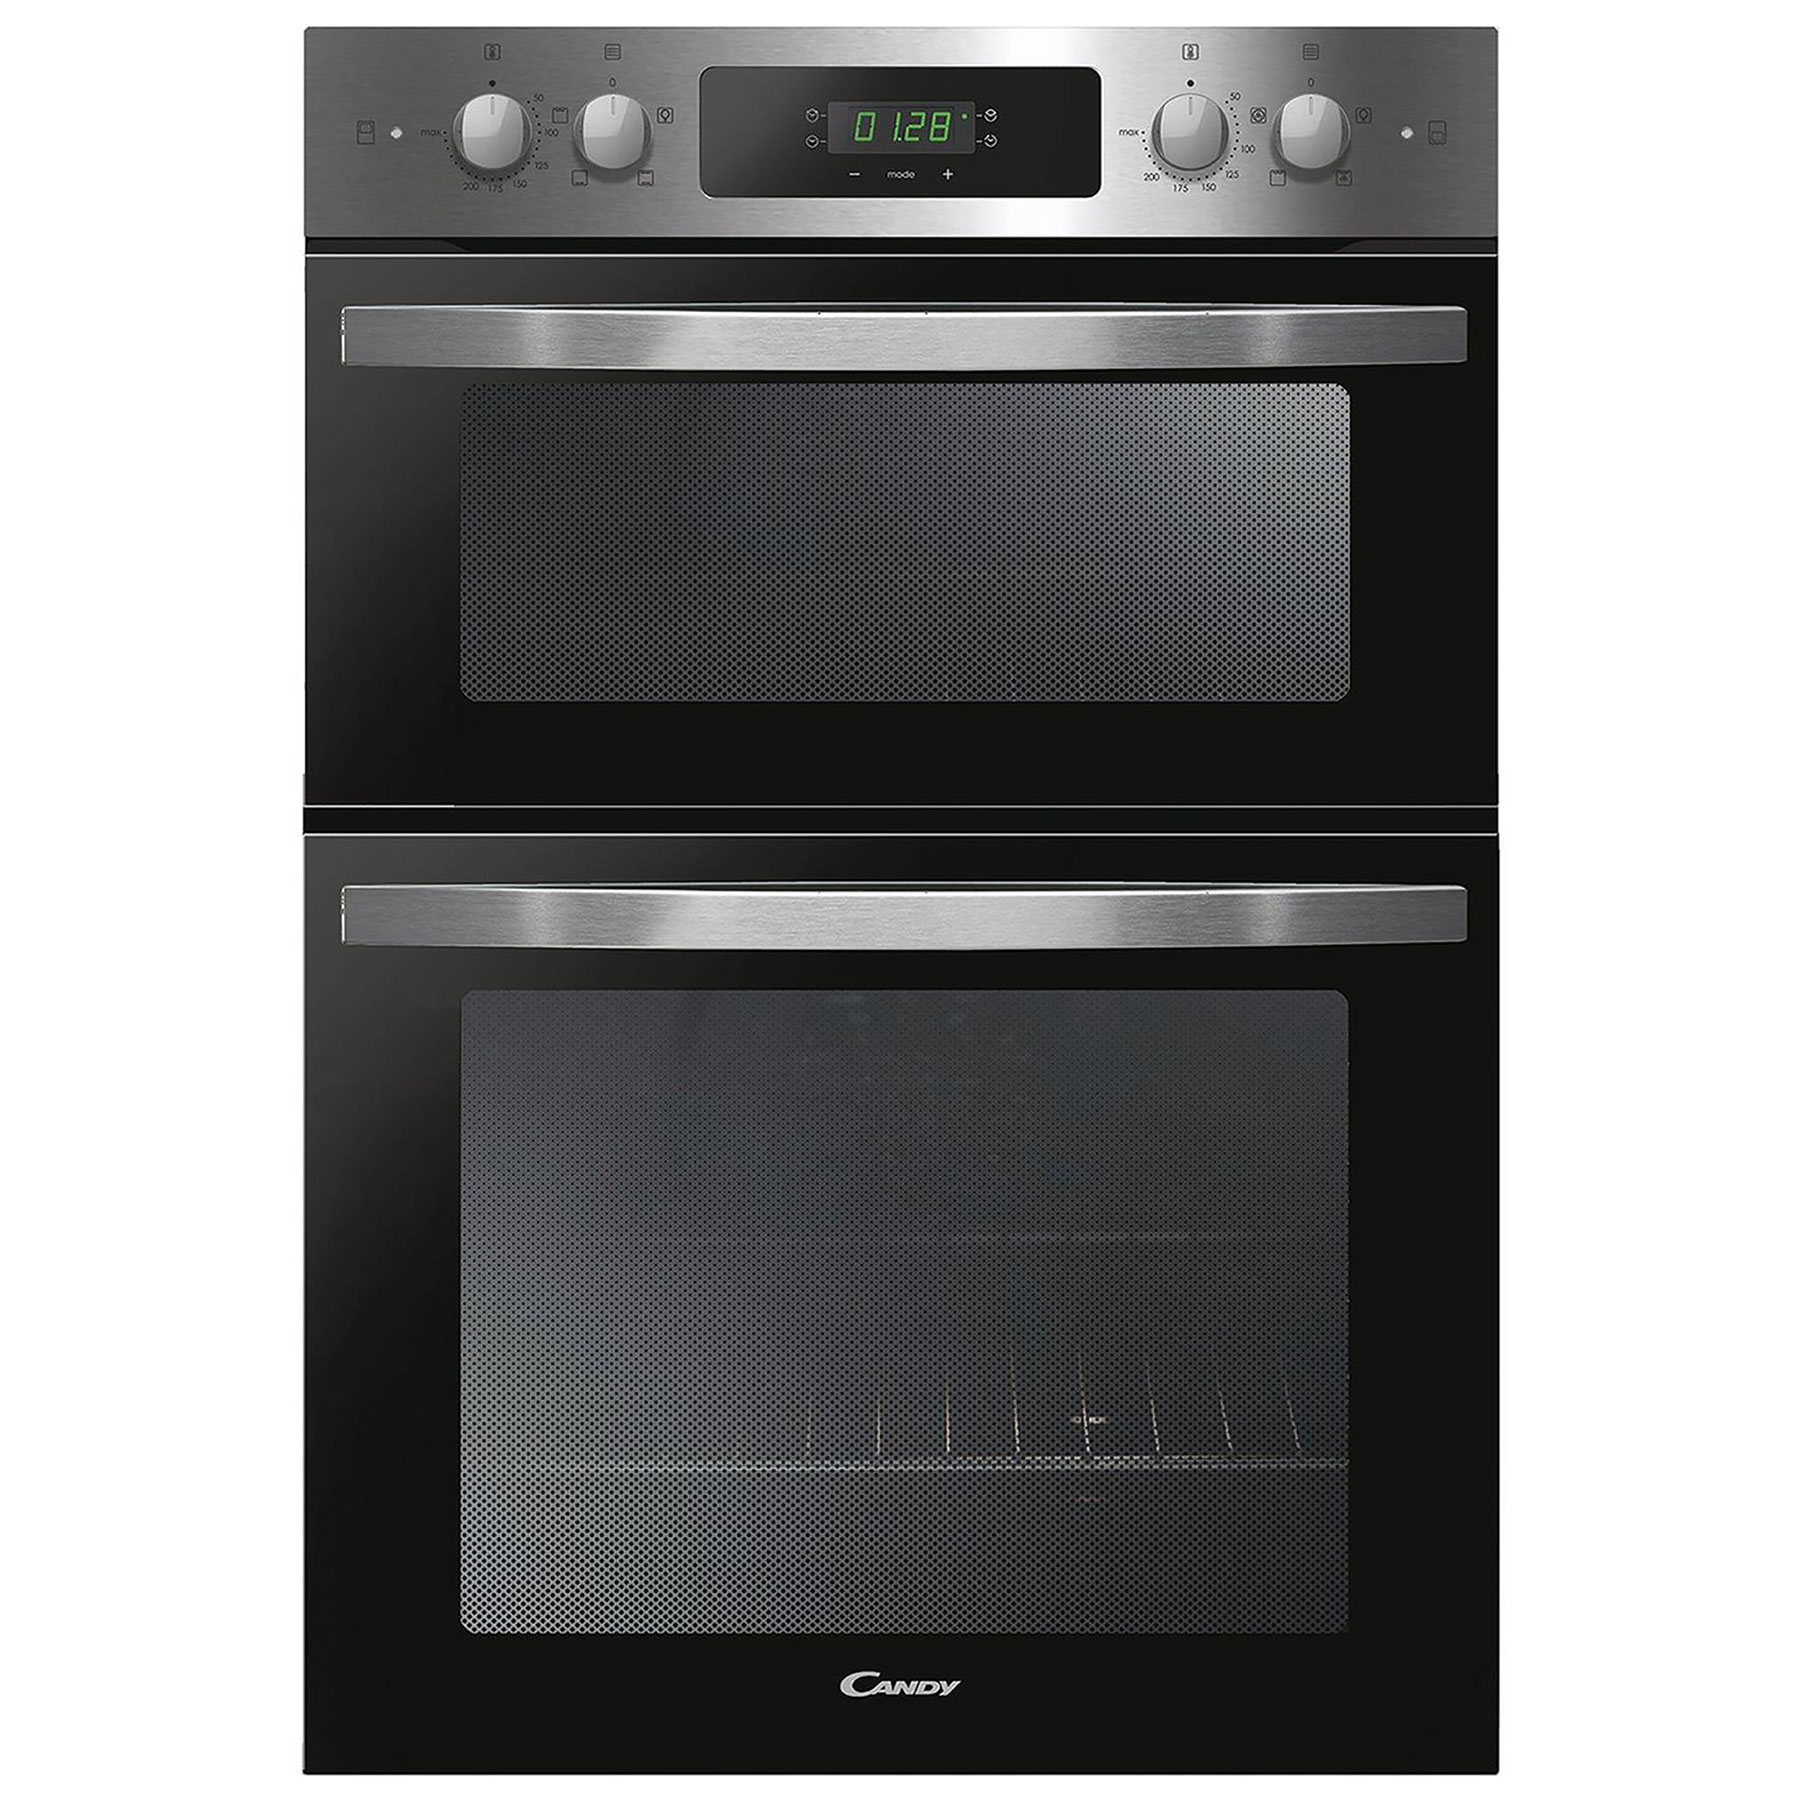 Candy FCI9D405X Built In Electric Double Oven in St Steel 40L A A Rate